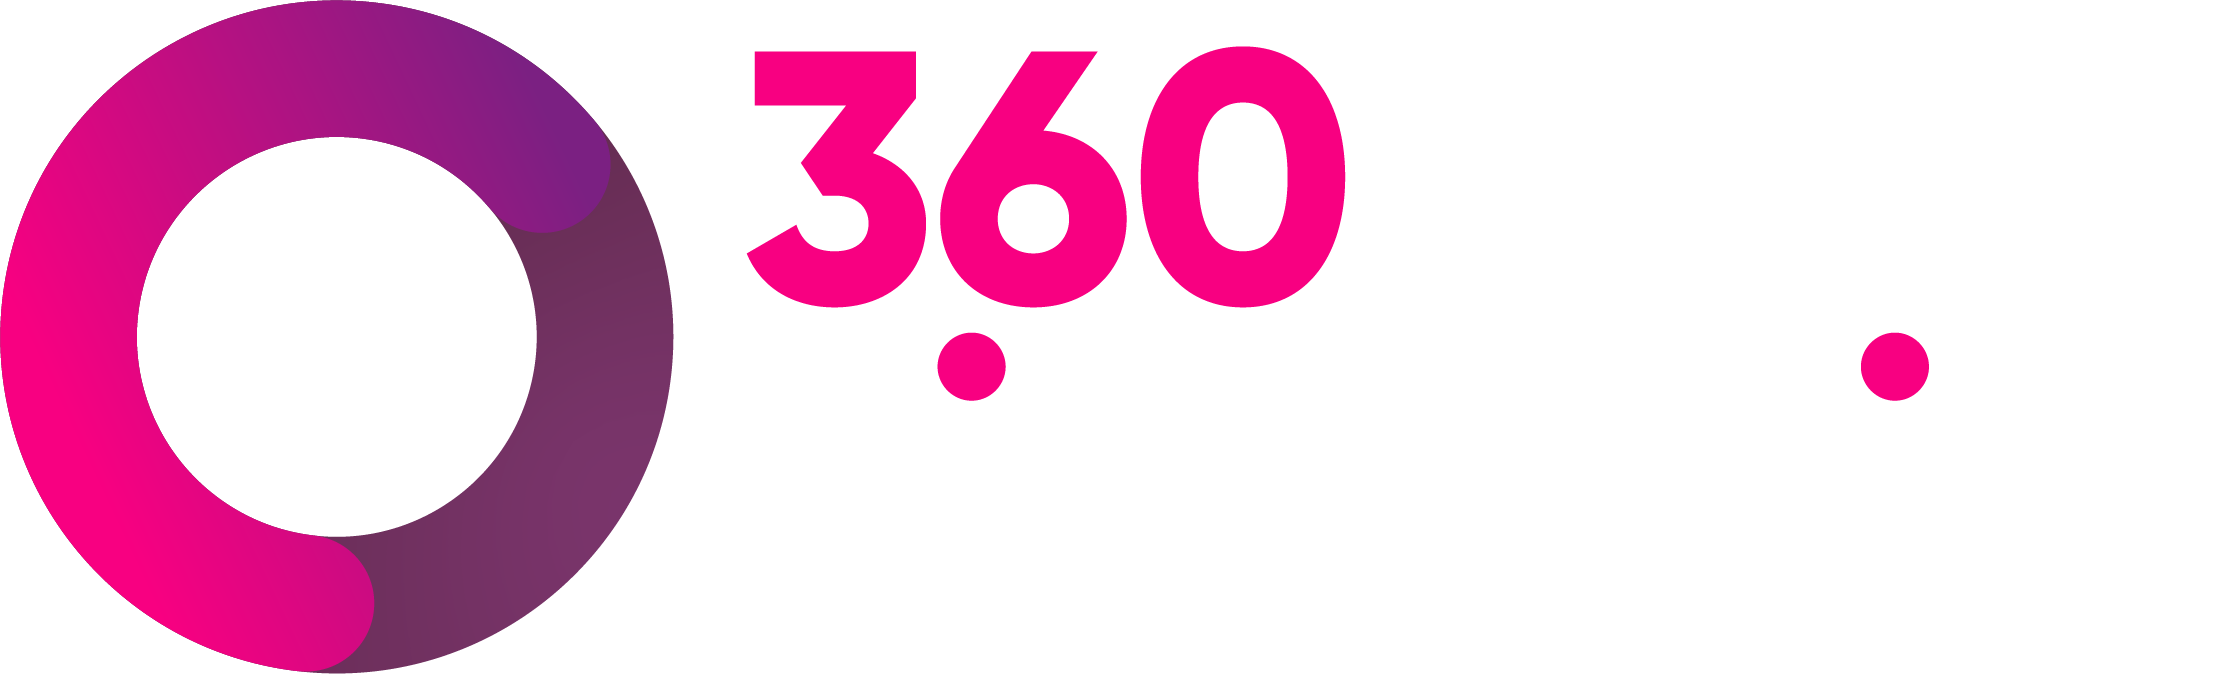 360 financial services logo updated